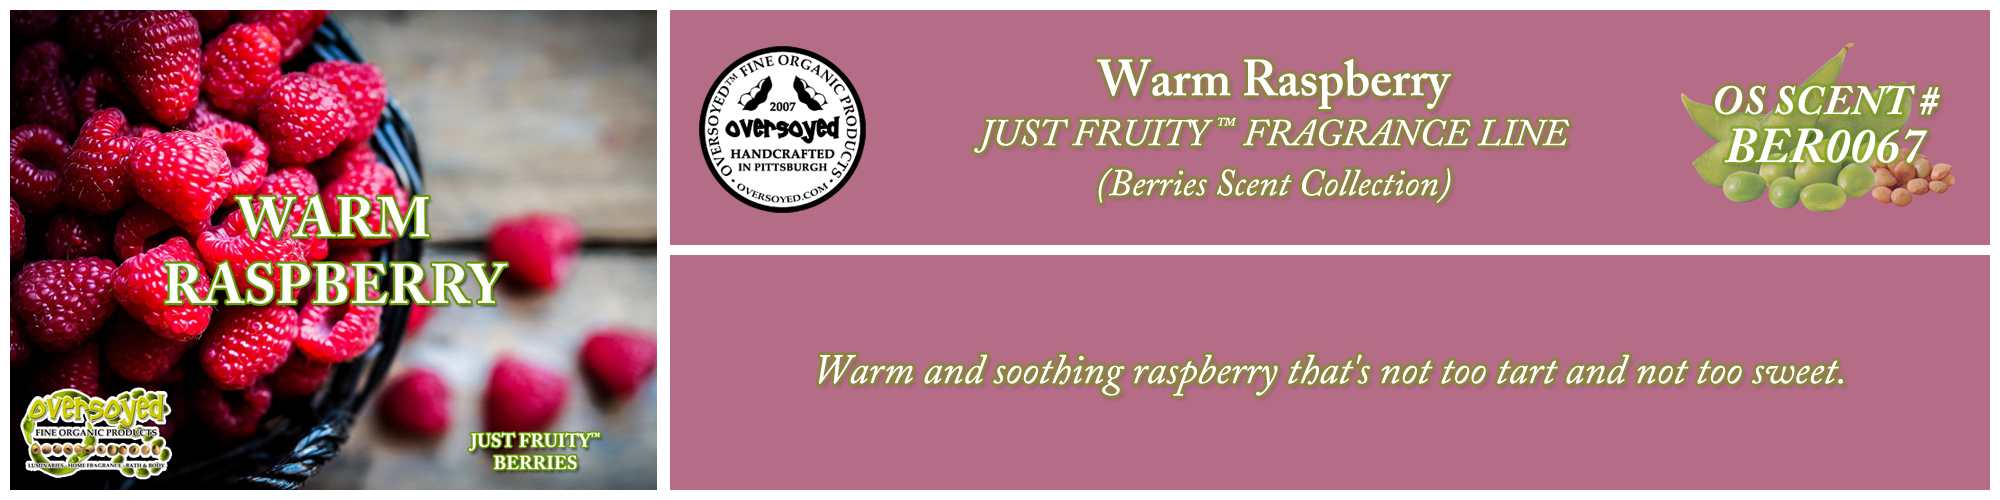 Warm Raspberry Handcrafted Products Collection